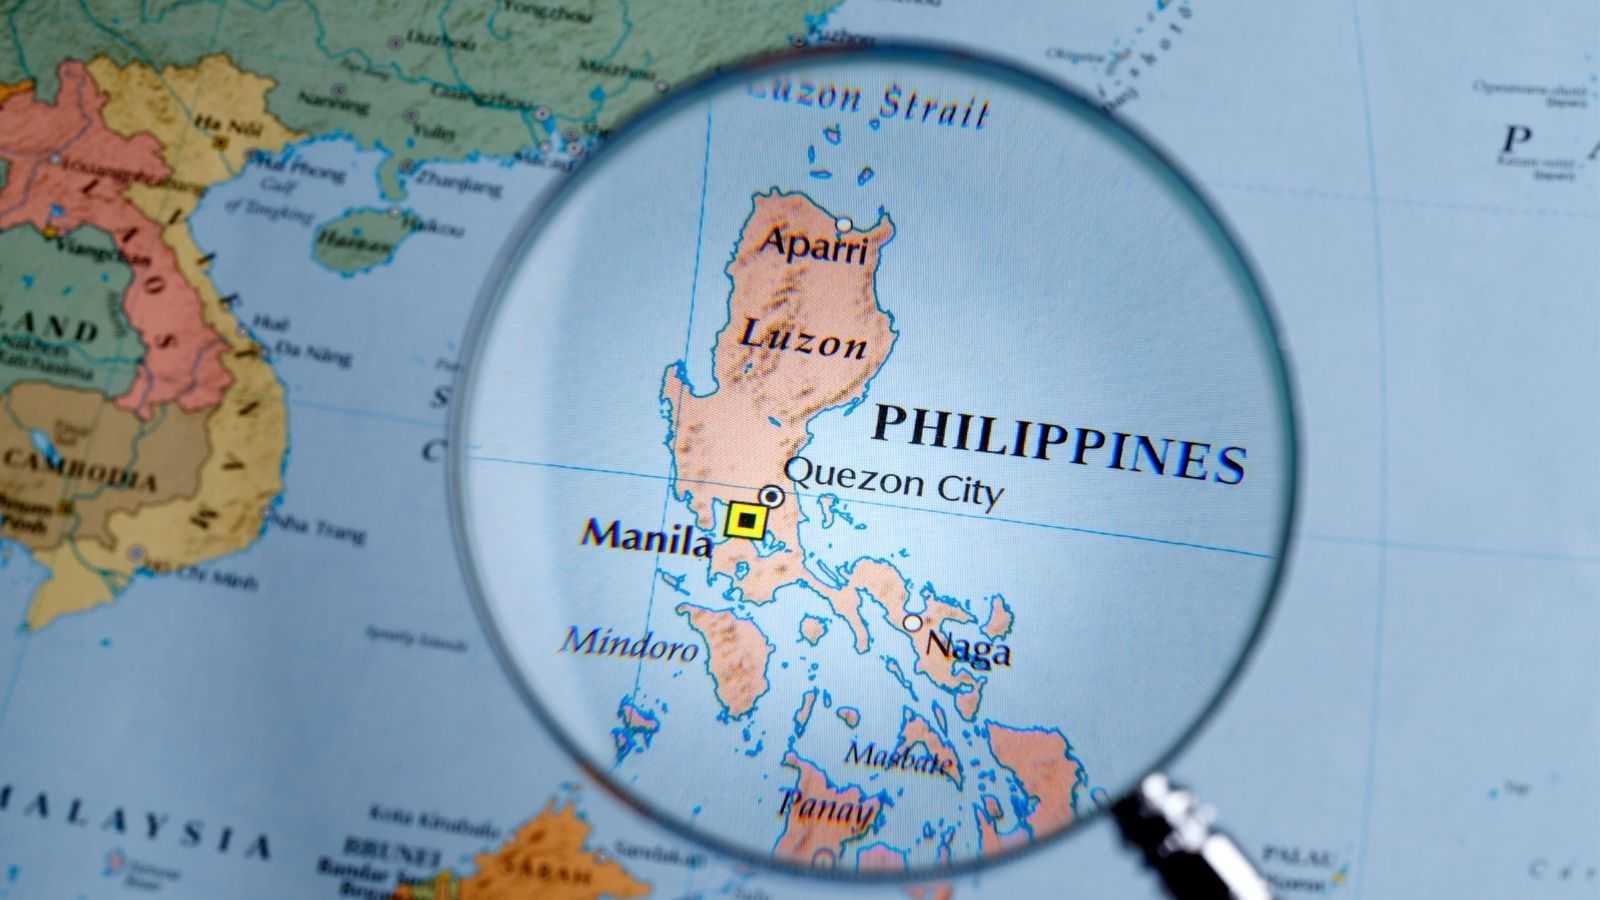 National Territory of the Philippines (Meaning, Tagalog Version, PDF)